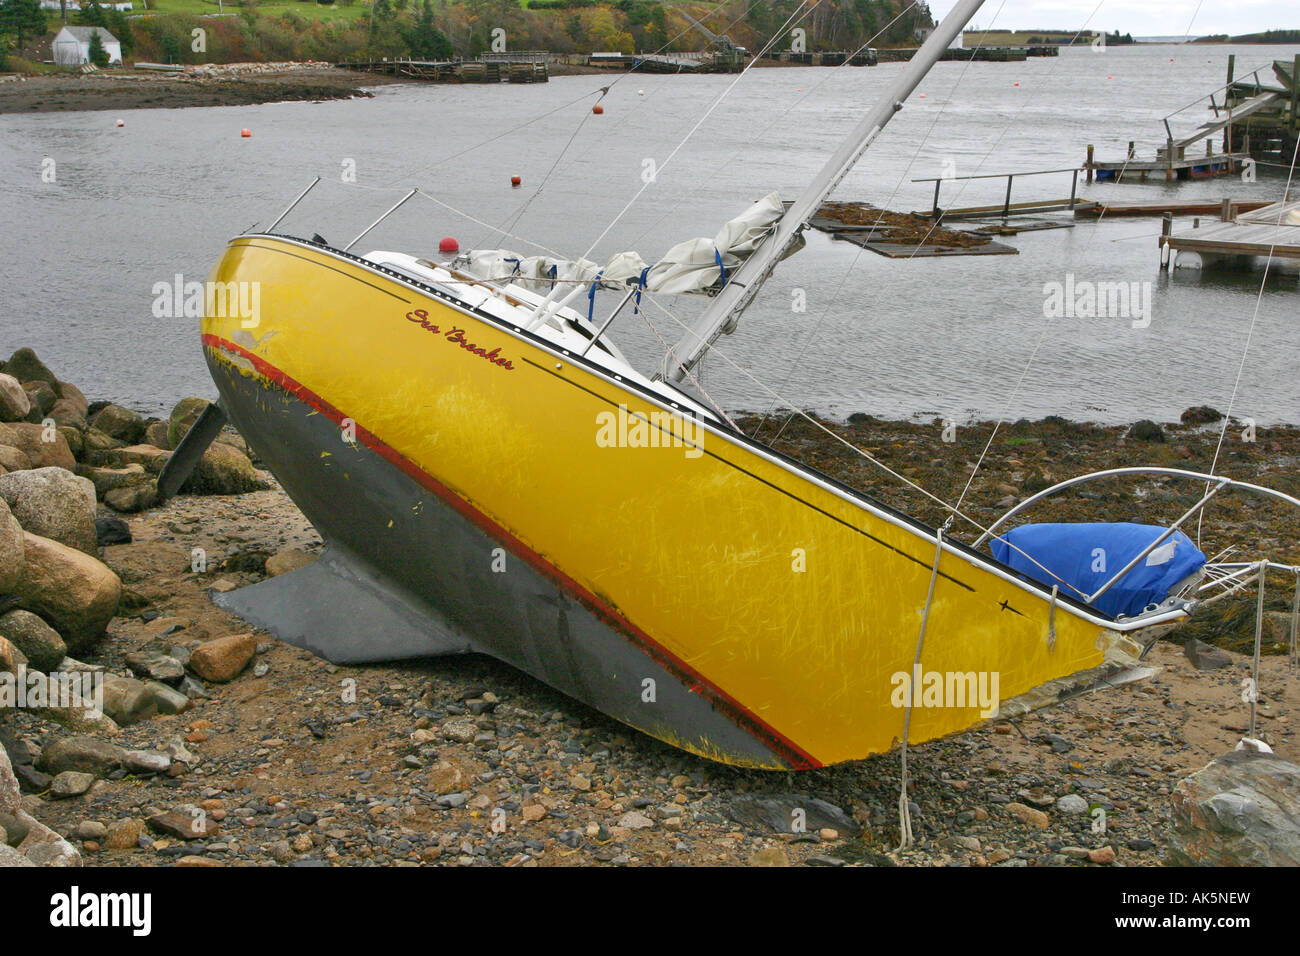 Damaged yacht laying on side on beach broken mooring Chester Tropical Storm Noel Nova Scotia Canada North America Stock Photo